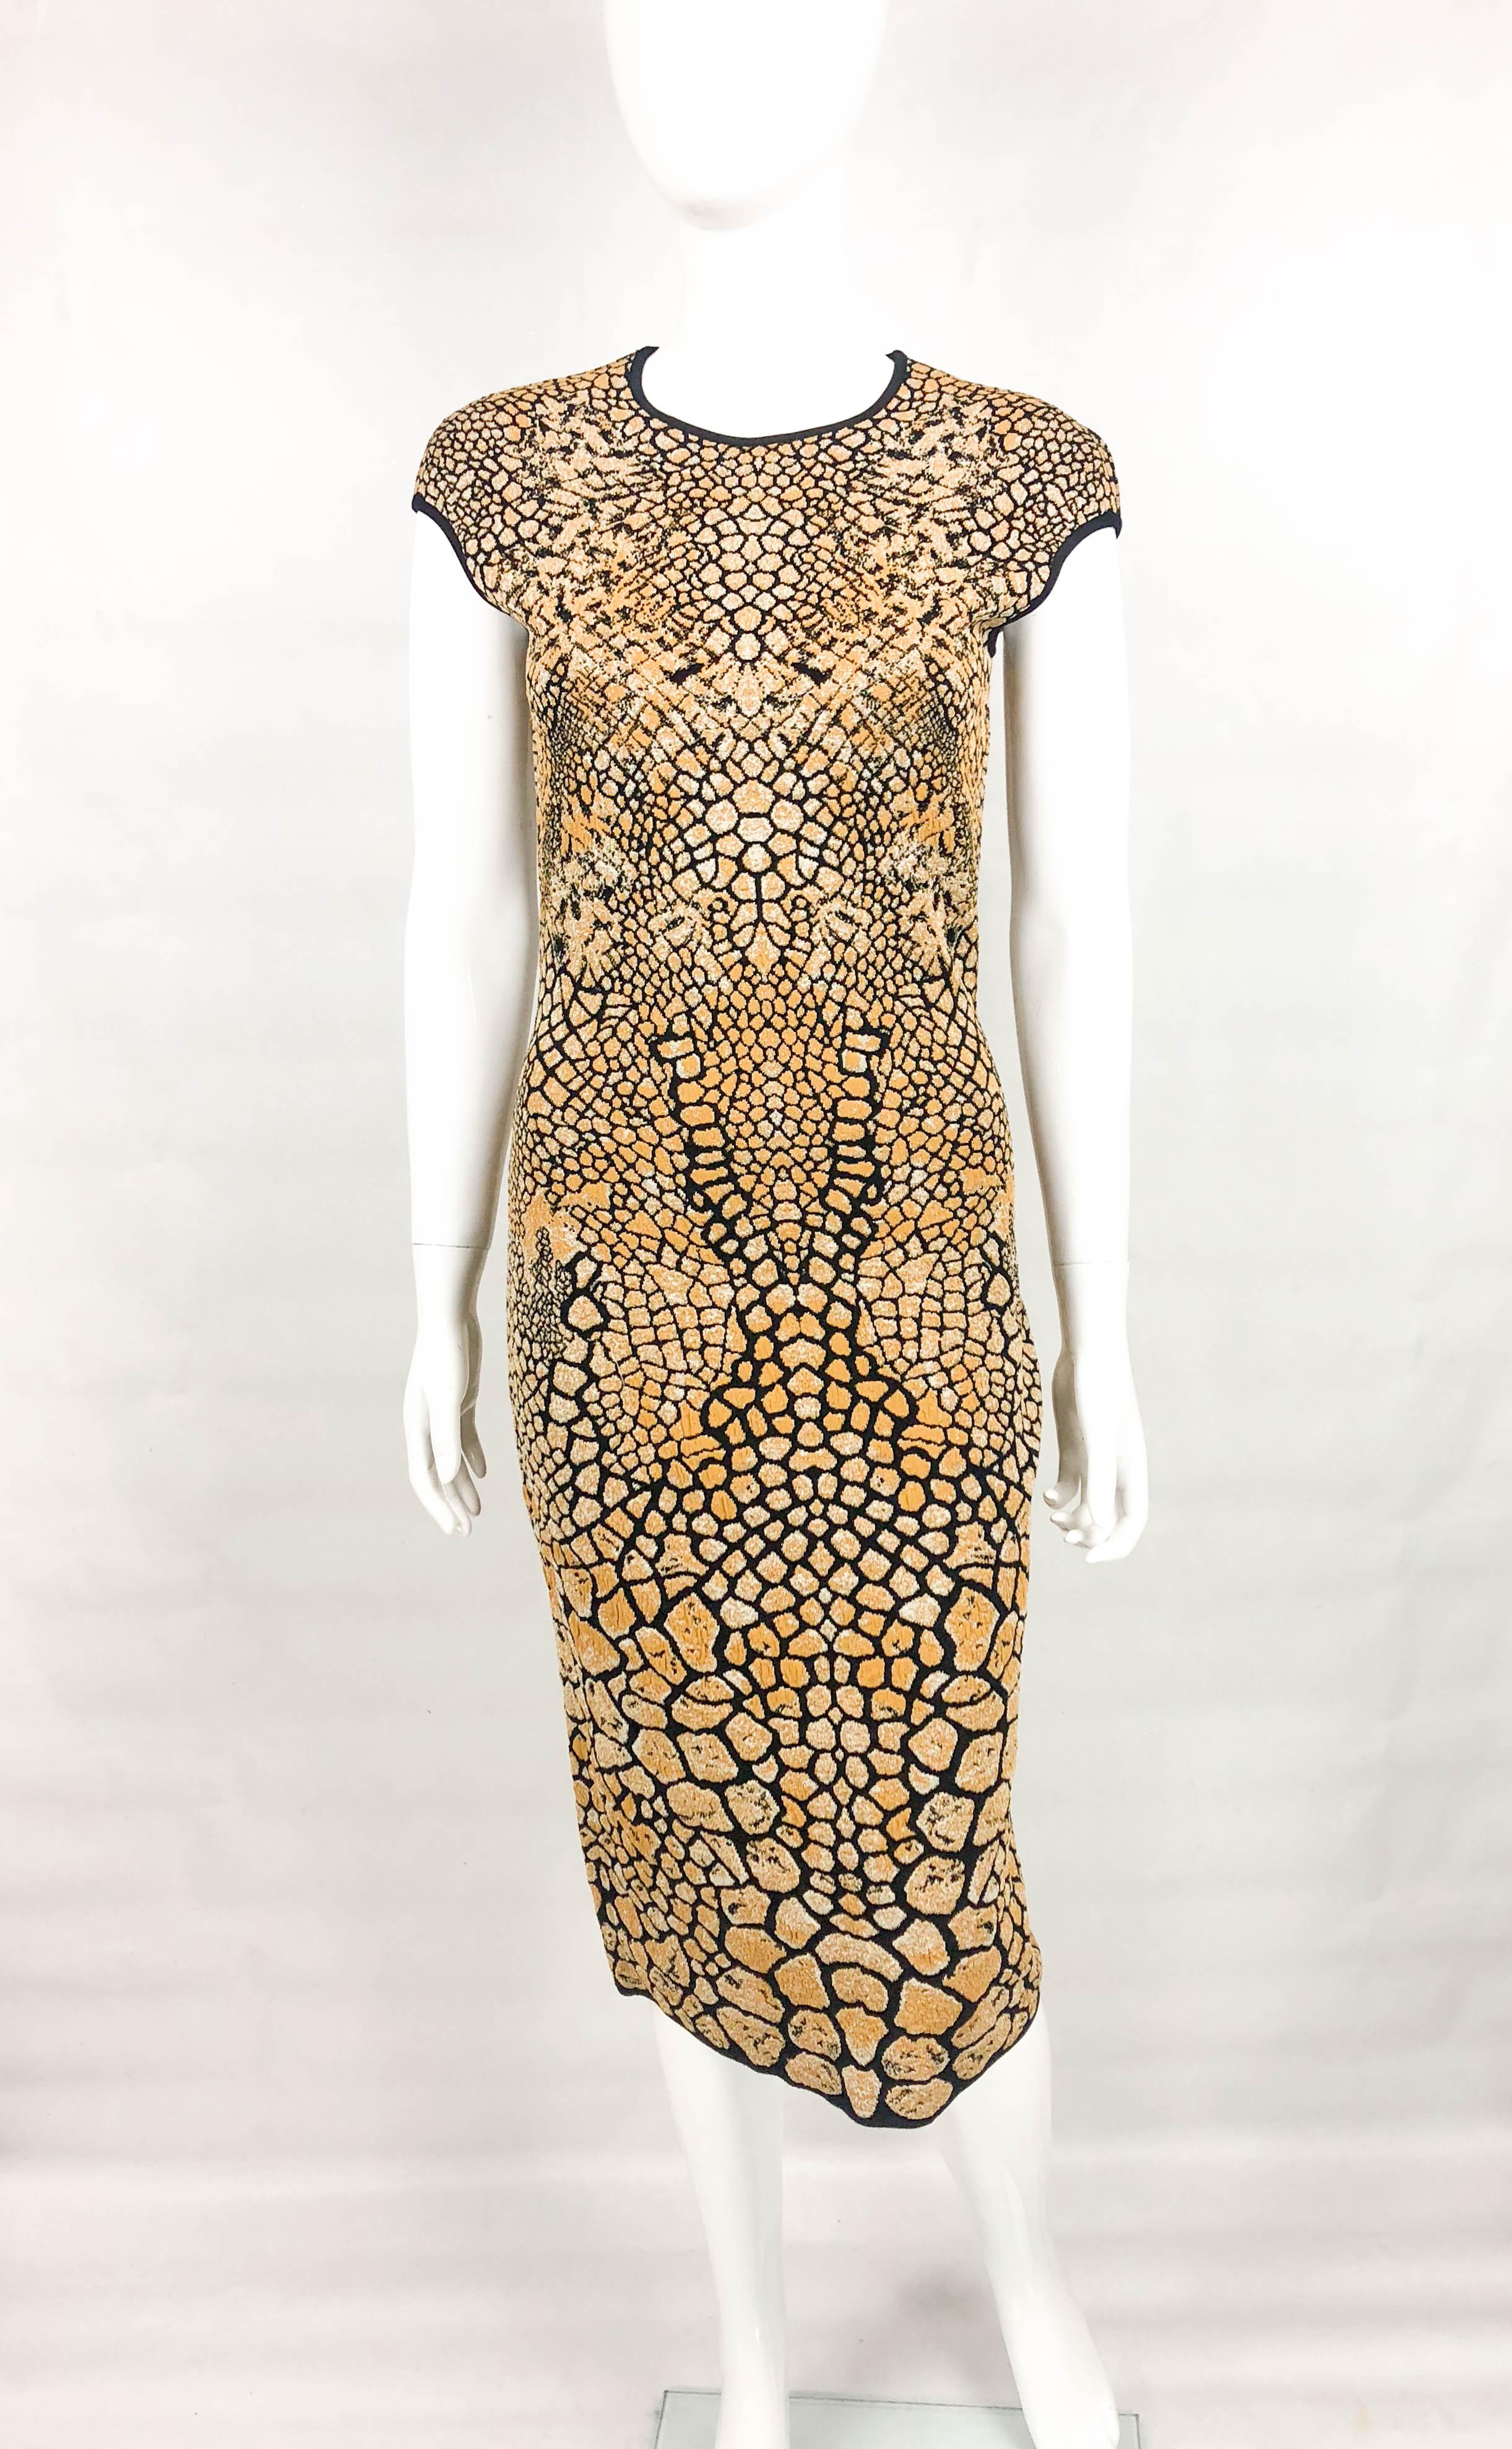 2009 Alexander McQueen Stretch Knit Golden and Black Dress In Excellent Condition For Sale In London, Chelsea